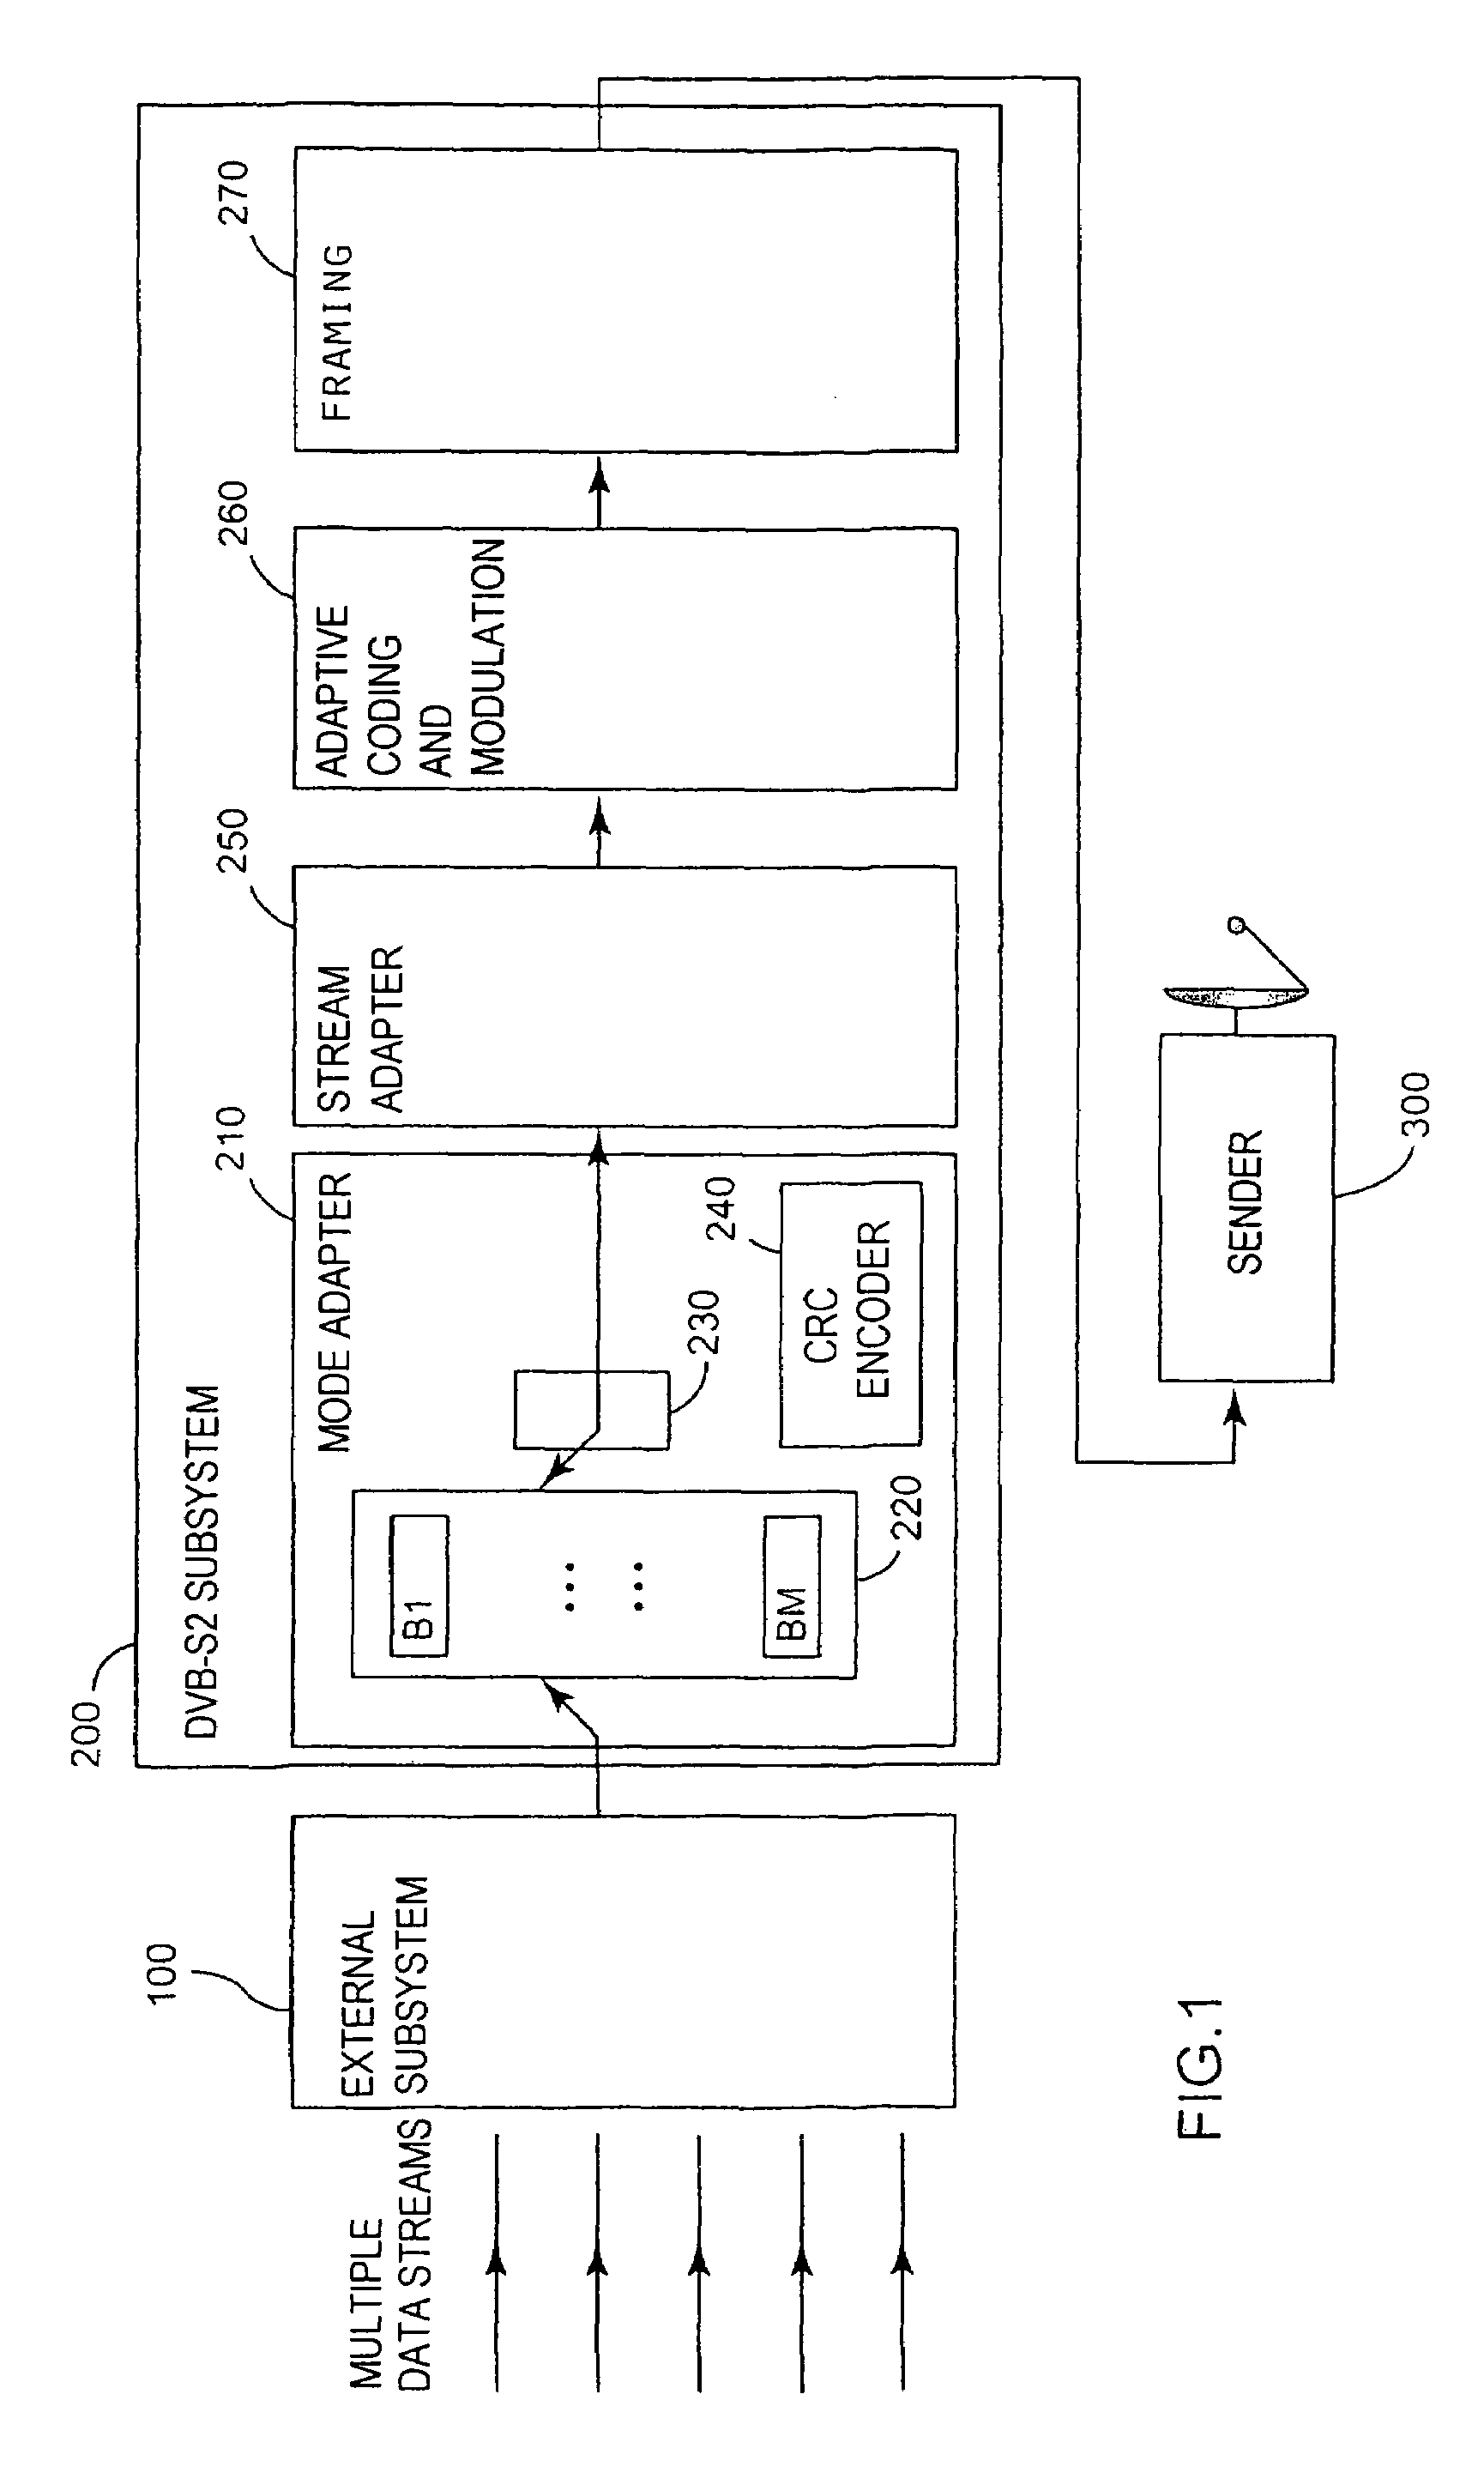 Method and a device for scheduling and sending data packets from a common sender to a plurality of users sharing a common transmission channel